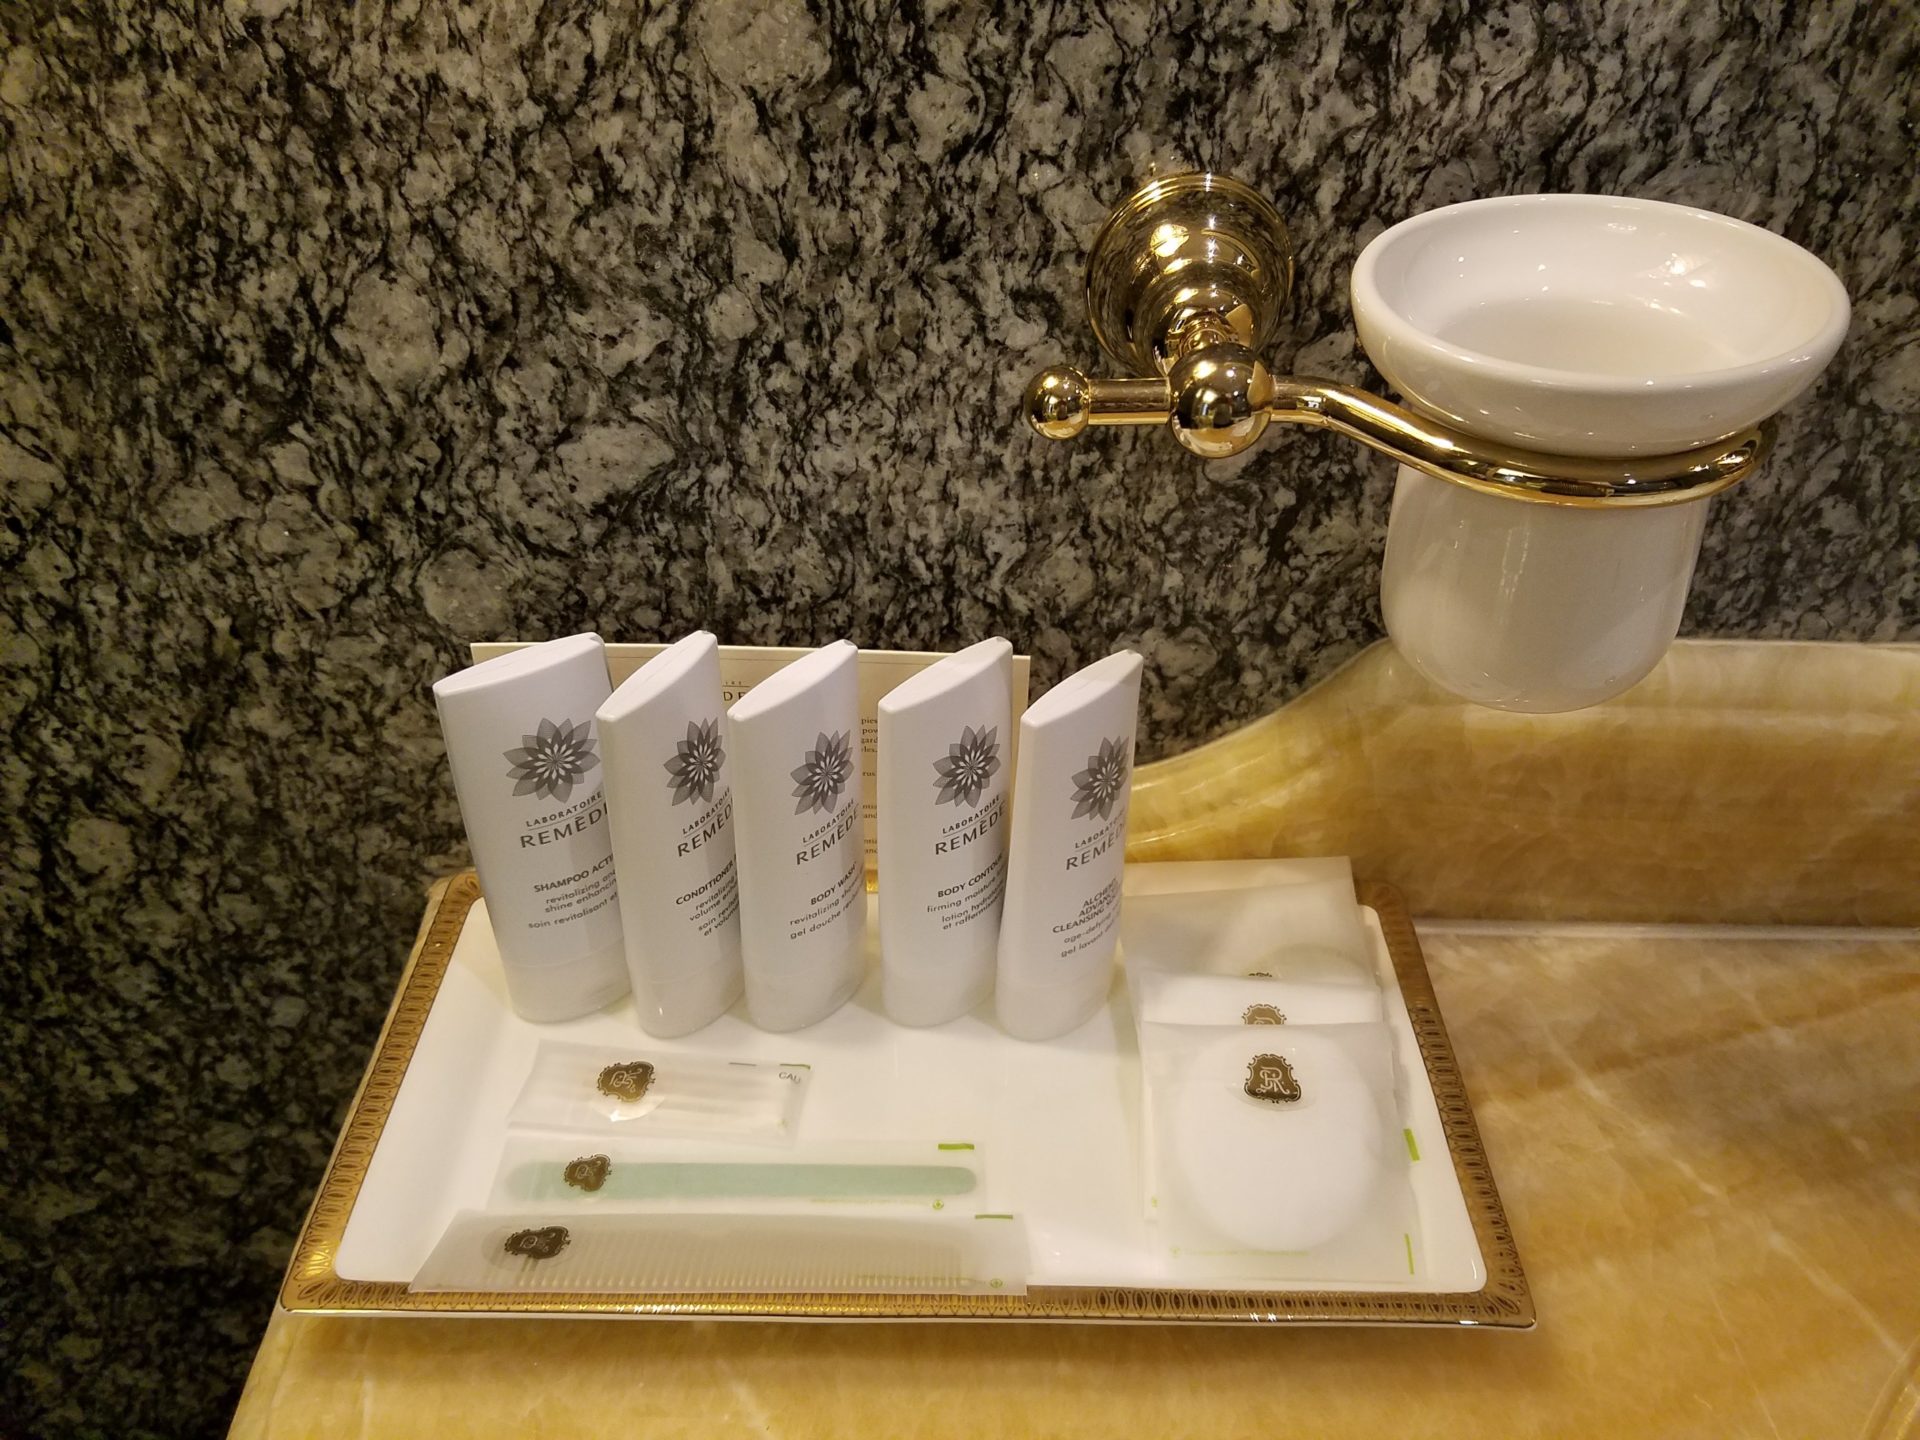 a tray with toiletries and a gold handle